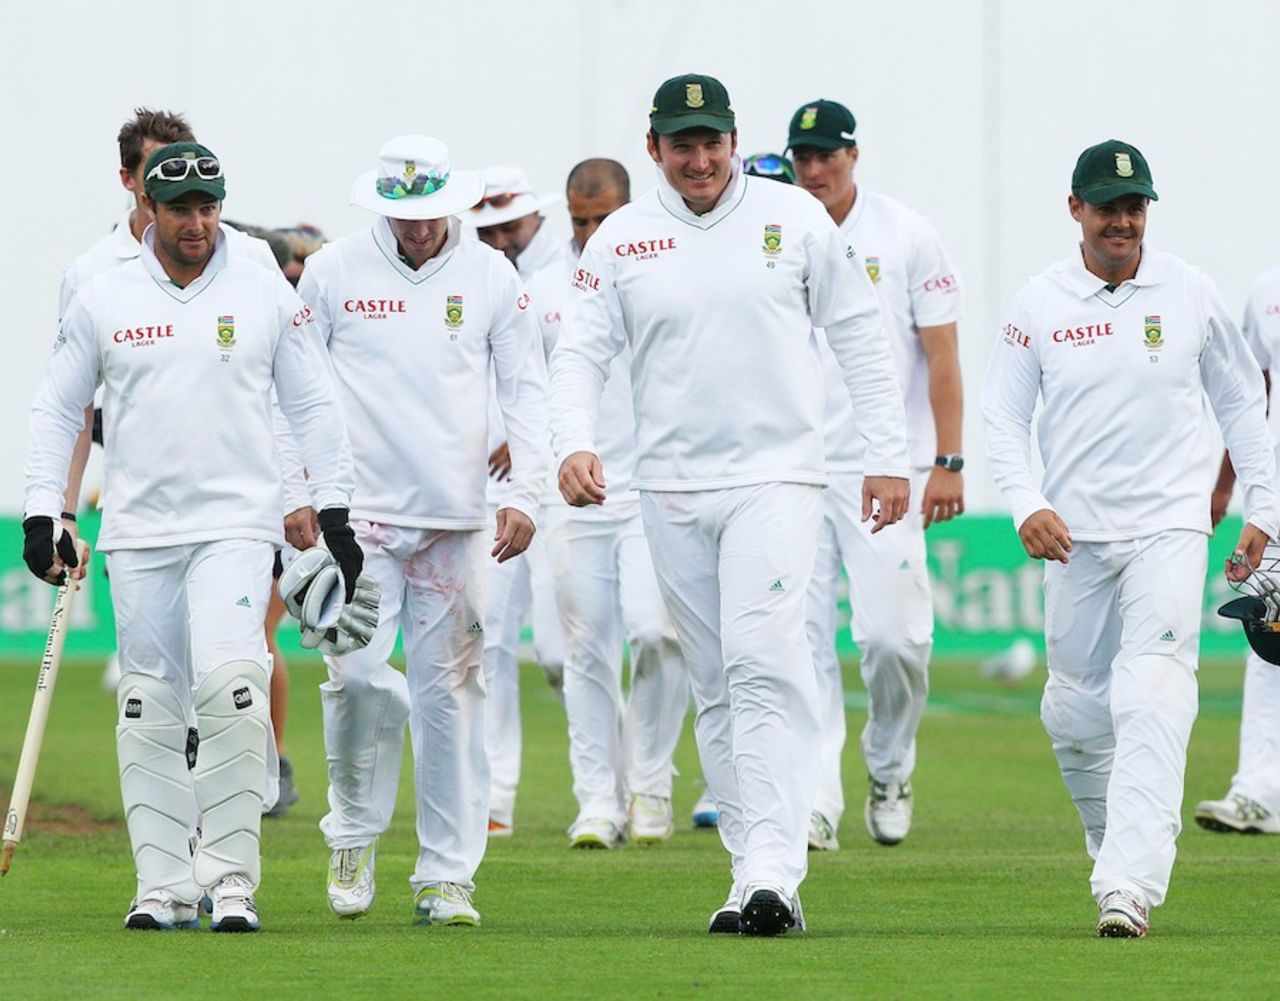 Graeme Smith leads his players off the field, New Zealand v South Africa, 3rd Test, Wellington, 5th day, March 27, 2012